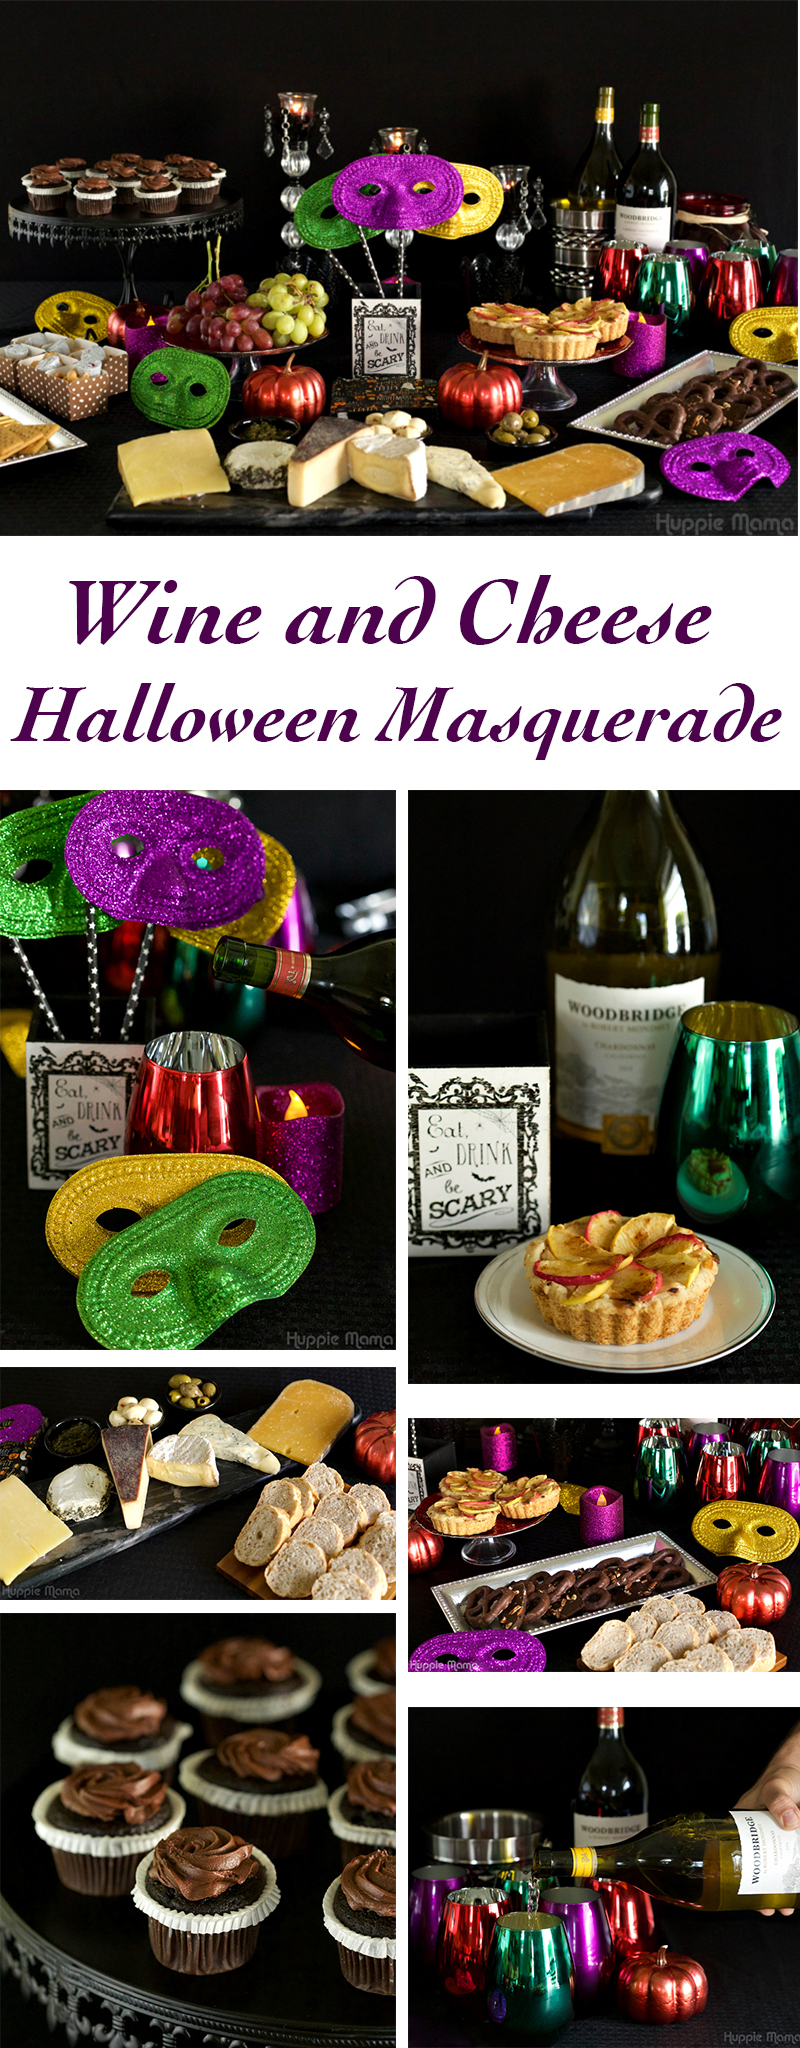 Wine and Cheese Halloween Masquerade Party